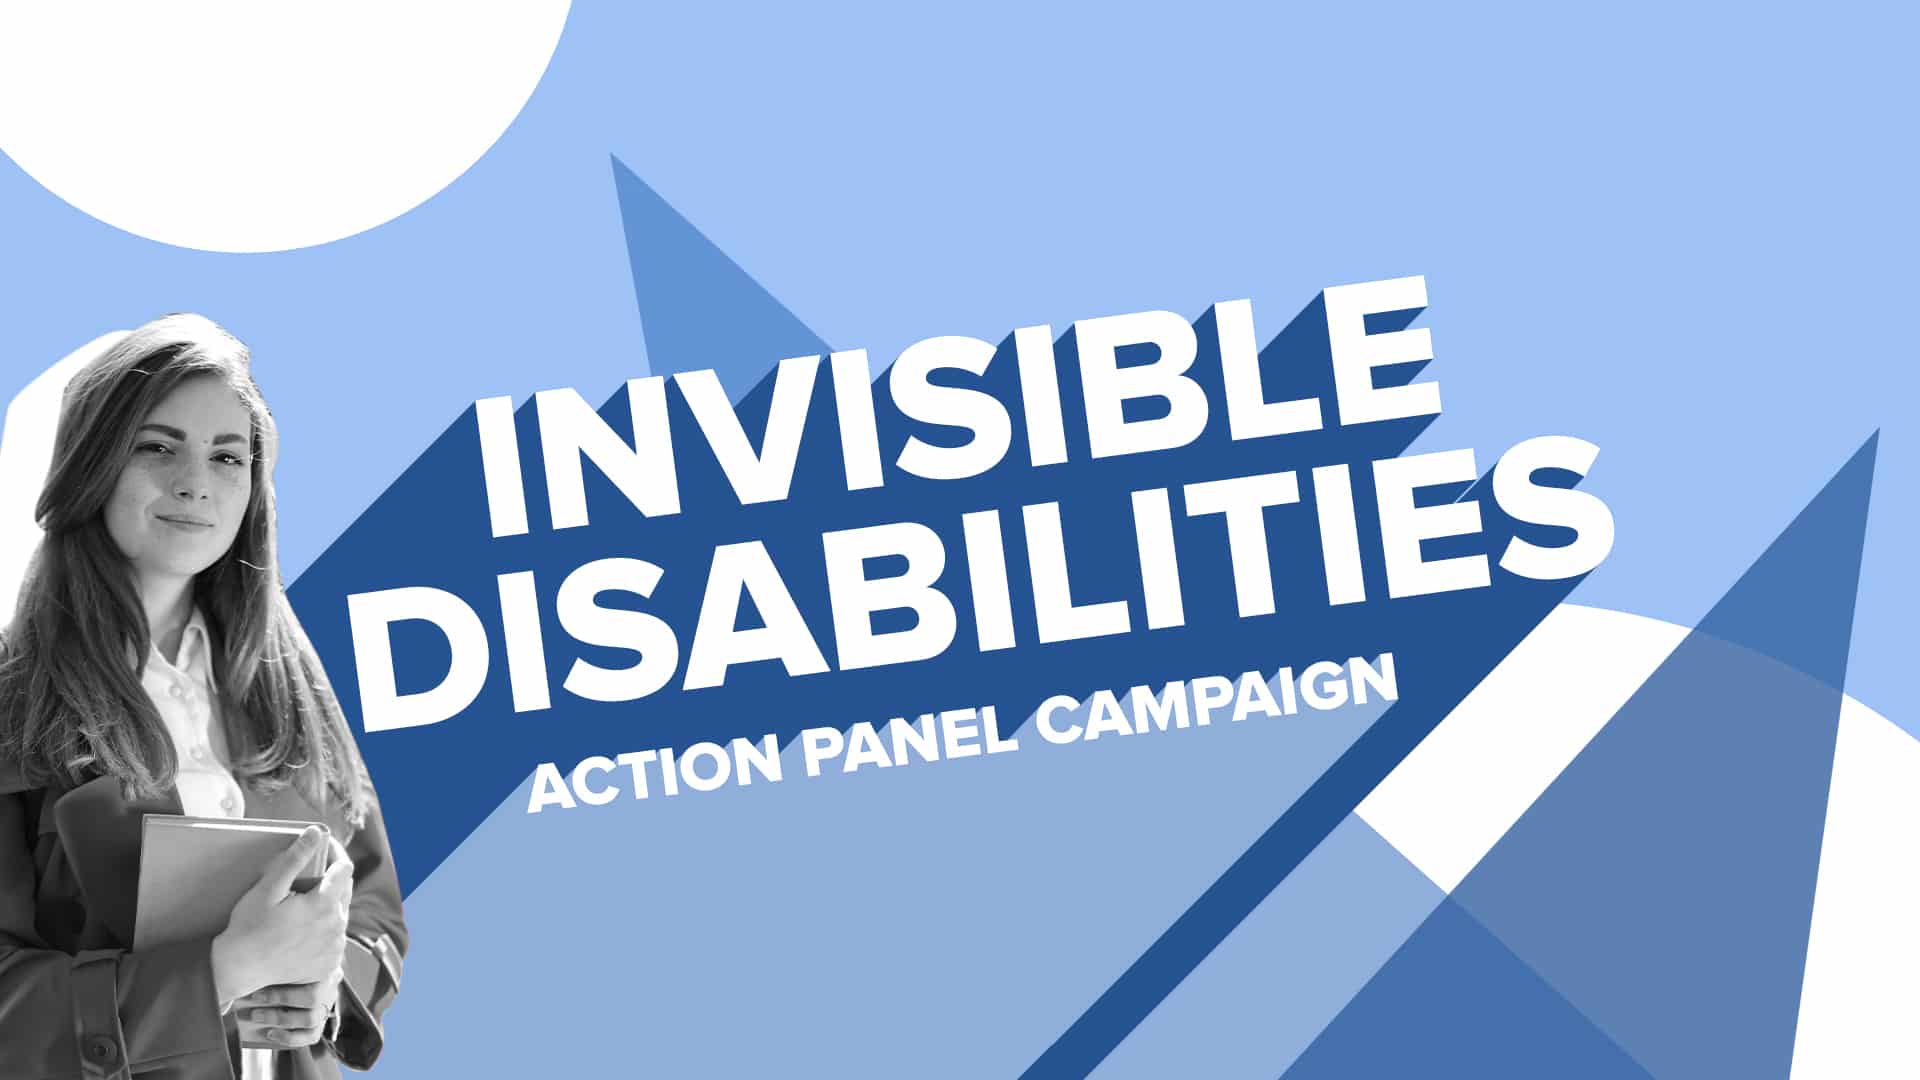 Shining a light on invisible disabilities - spunout